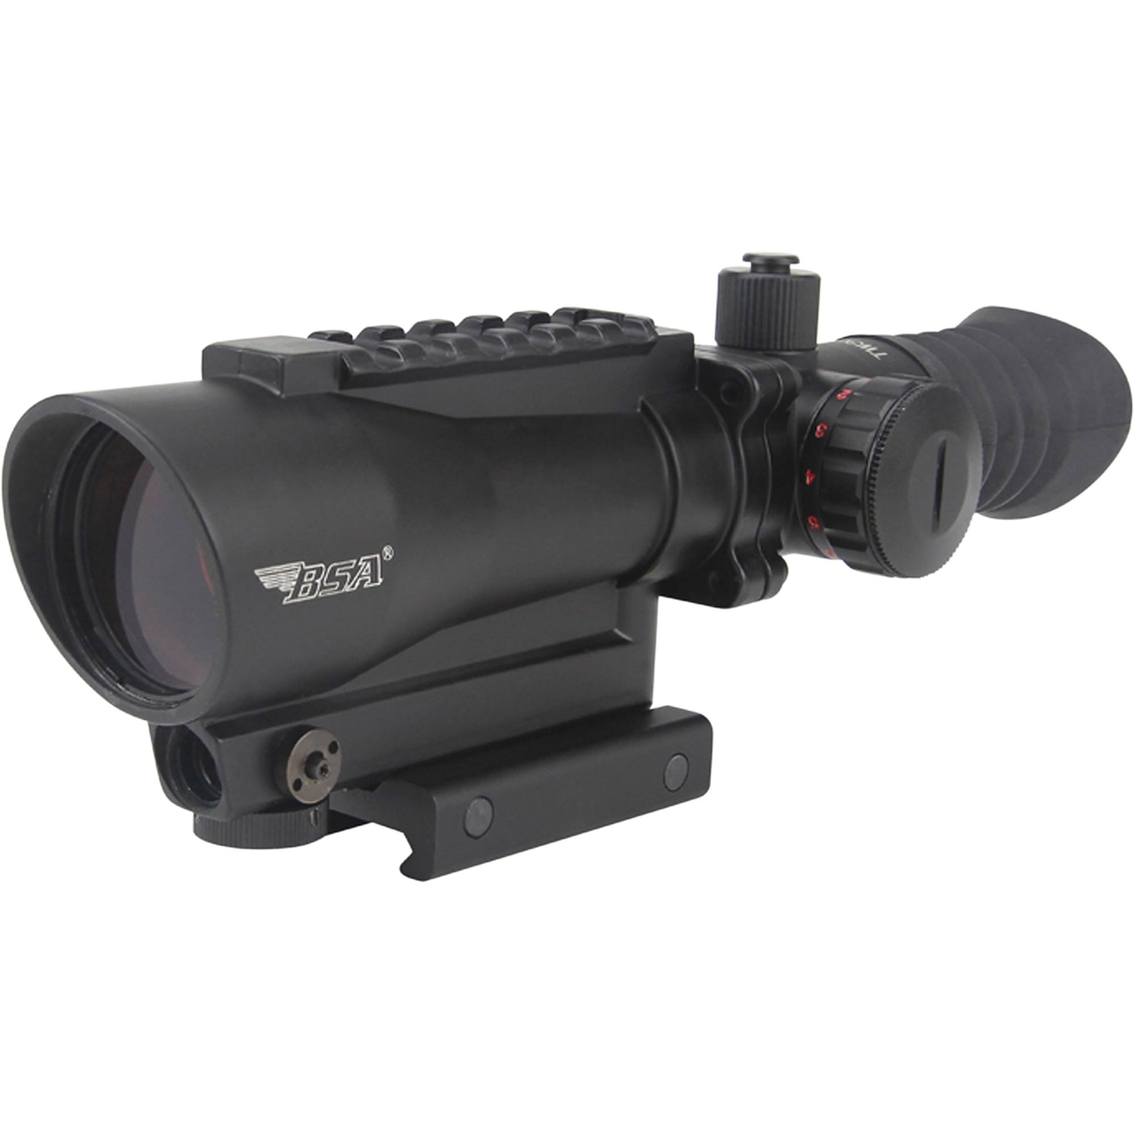 Bsa Optics Tactical Weapon Rifle Scope | Atg Archive | Shop The